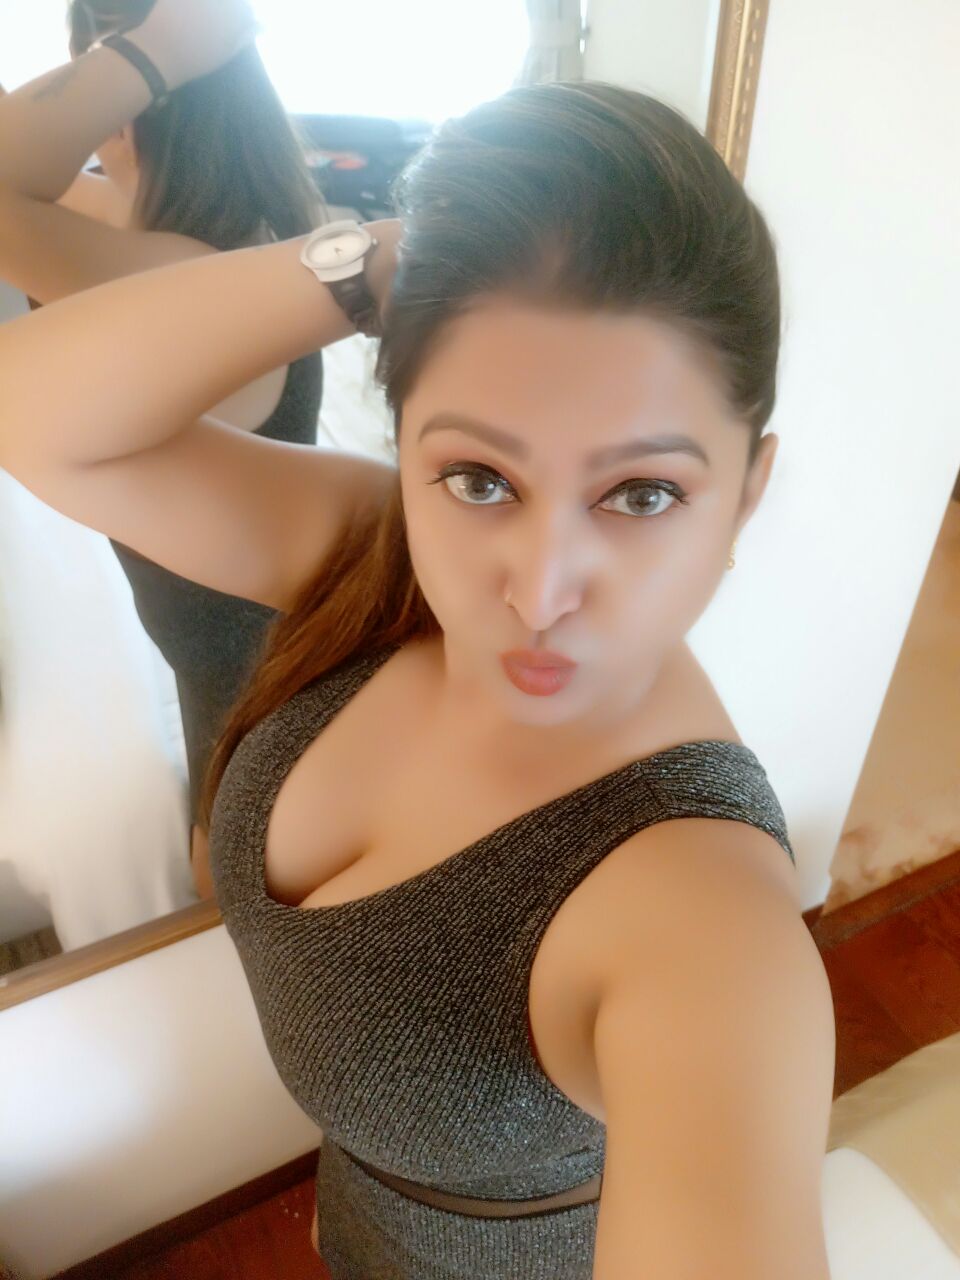 Call girl in Noida - ￣￣Young Call Girls In Sector 53 (Noida) ꧁❤ 92896Call28044 ❤꧂ Escorts Service in Delhi Ncr